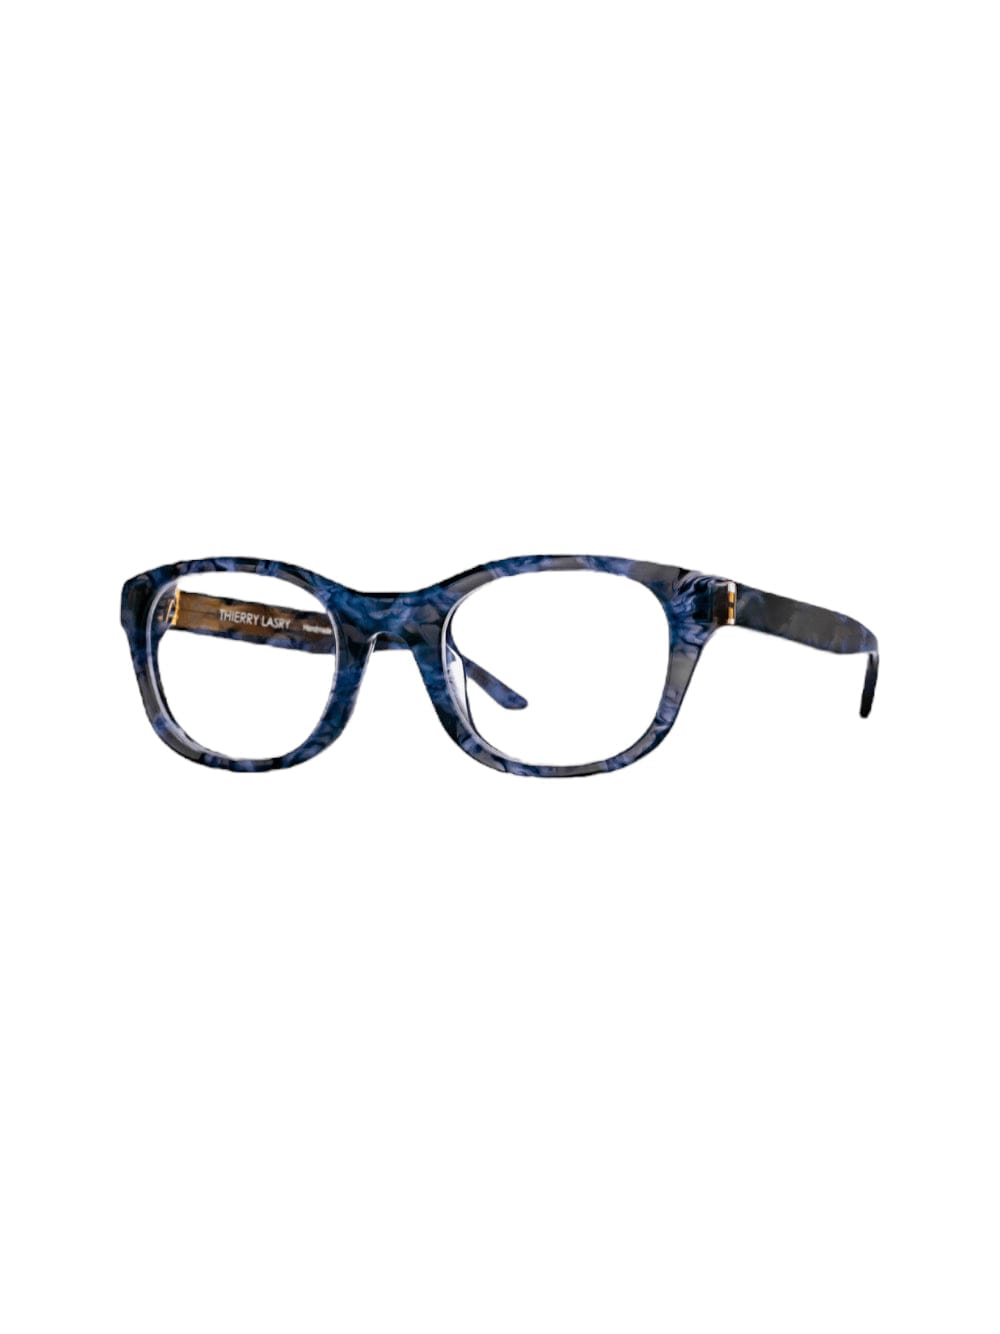 Thierry Lasry Chaoty - Blue Havana Glasses